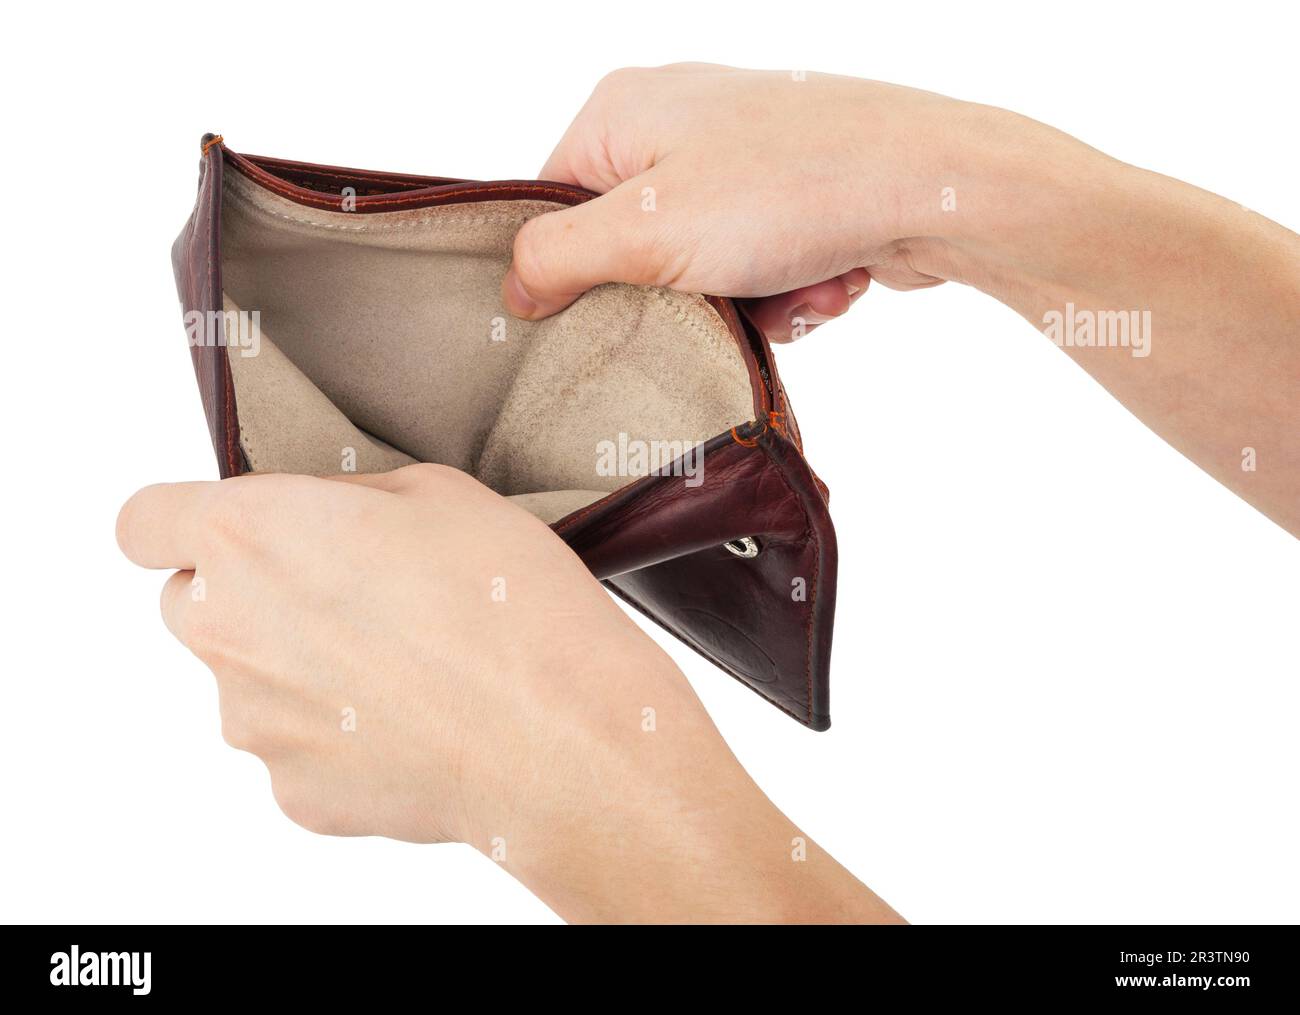 Empty Wallet Hands Young Man Stock Photo by ©perfectlab 444548008